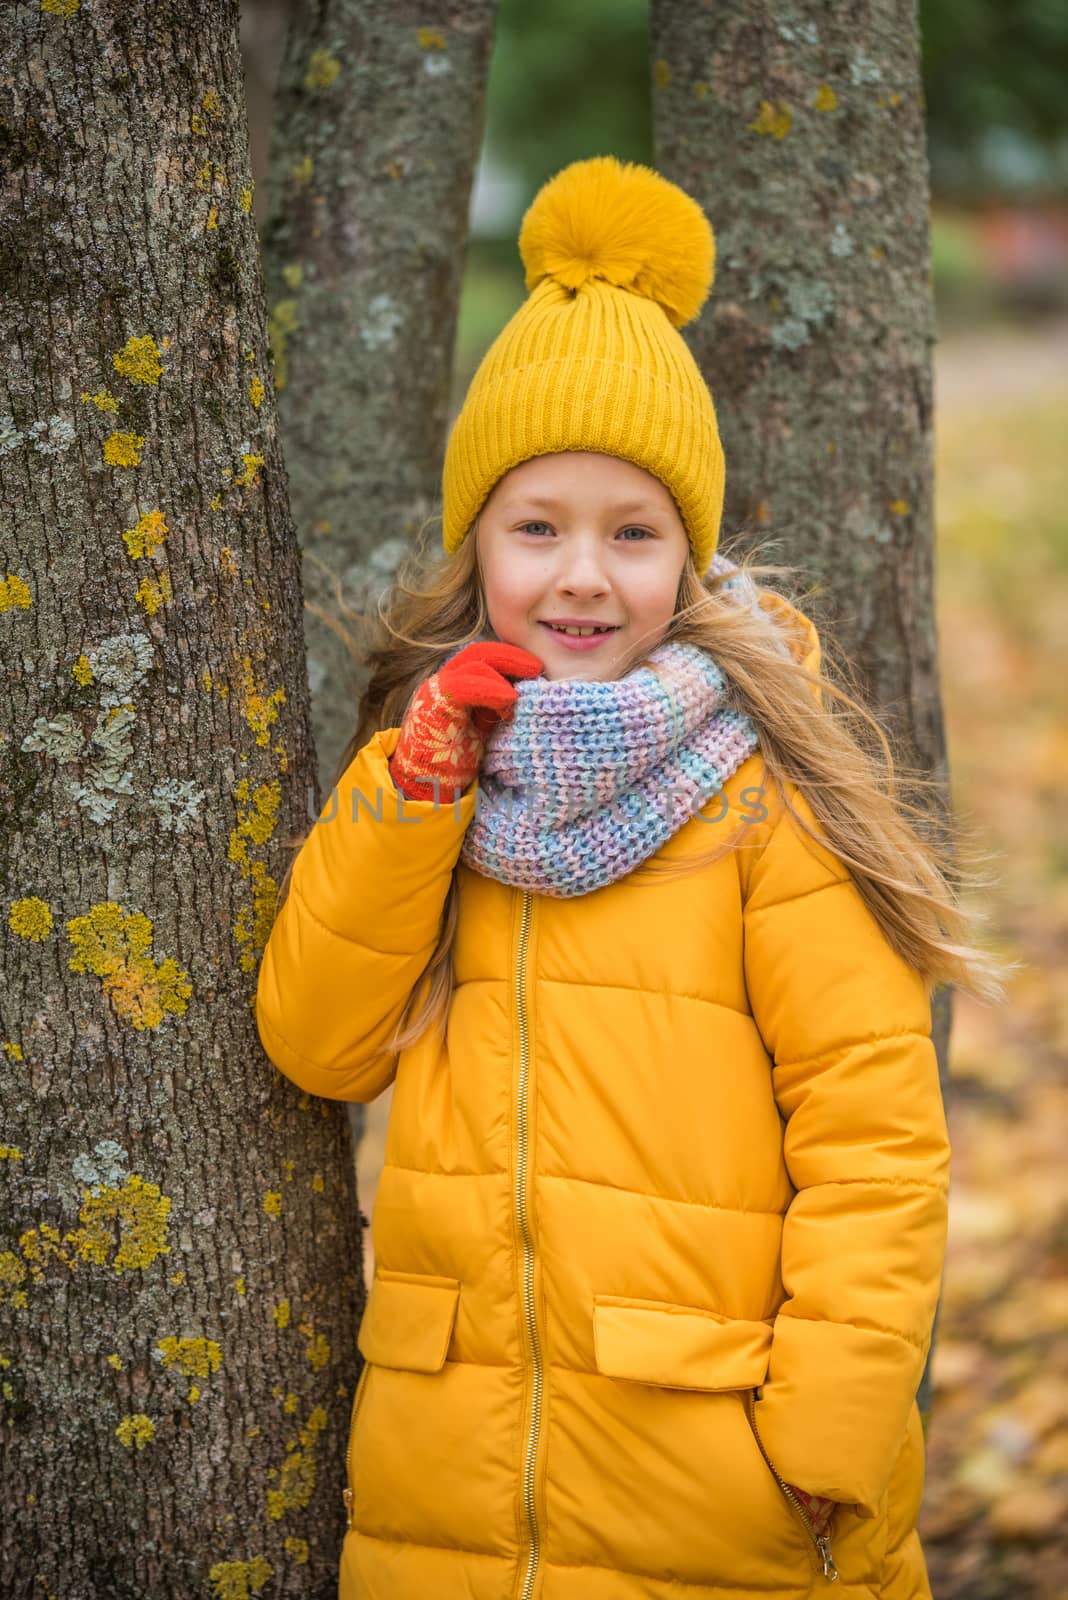 Little girl with blond hair in autumn background by infinityyy